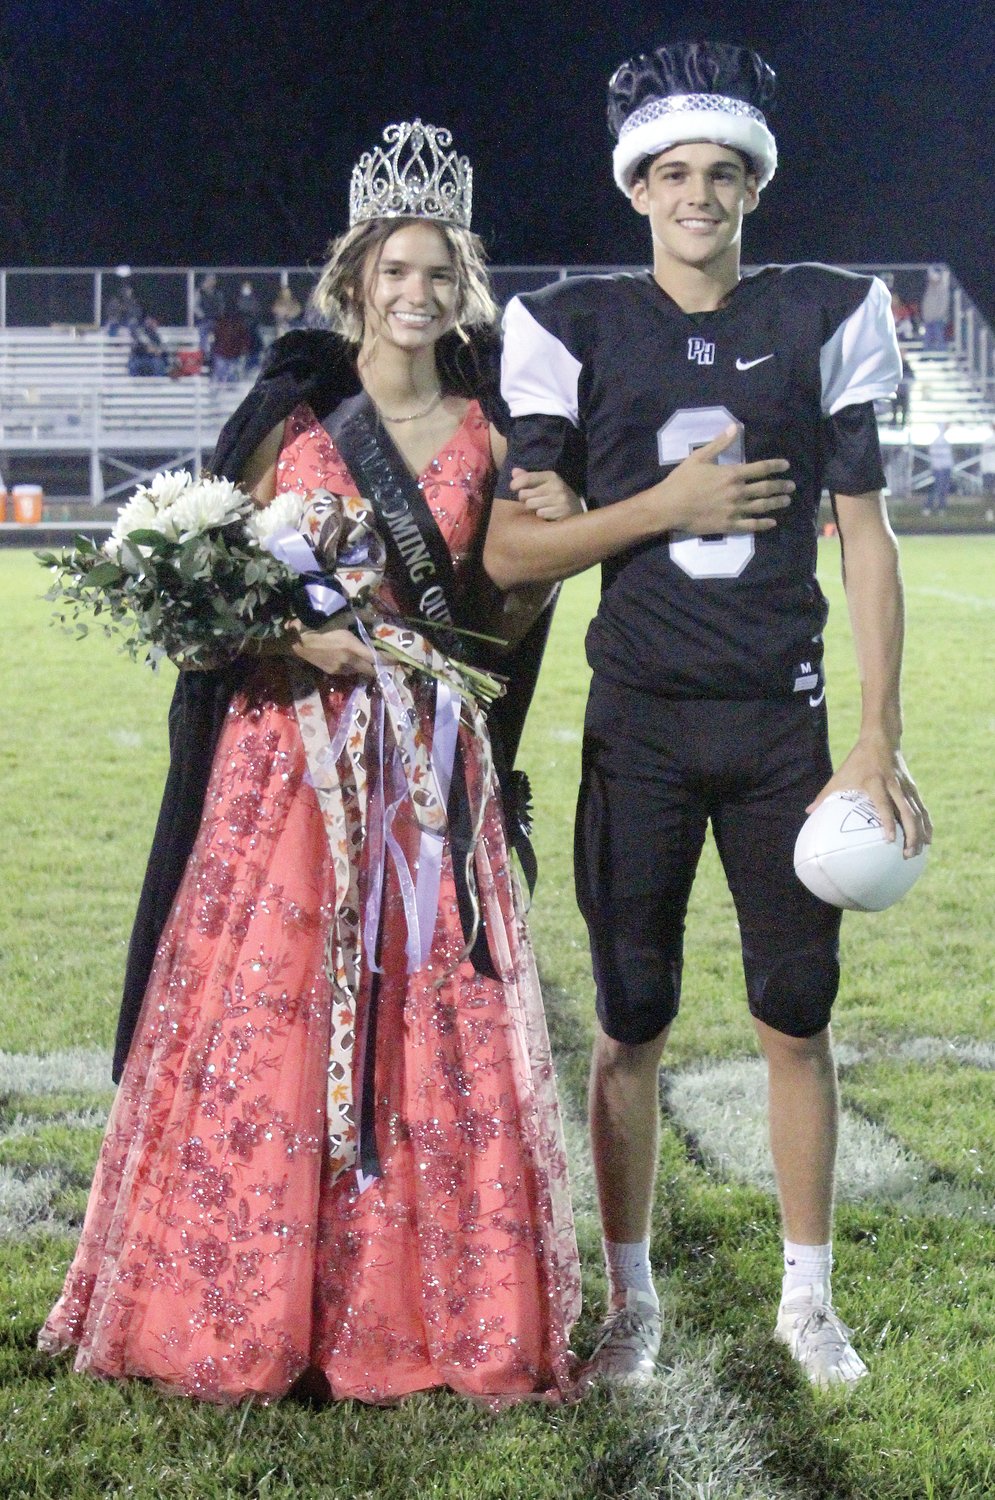 Hollie Kouns and Riley Ferguson were named Parke Heritage Homecoming Queen and King during ceremonies held at halftime of the football game on Friday. Hollie is the daughter of Gary Kouns of Montezuma. Riley is the son of Eric Ferguson of Waveland and Kerry Ferguson of Rockville.